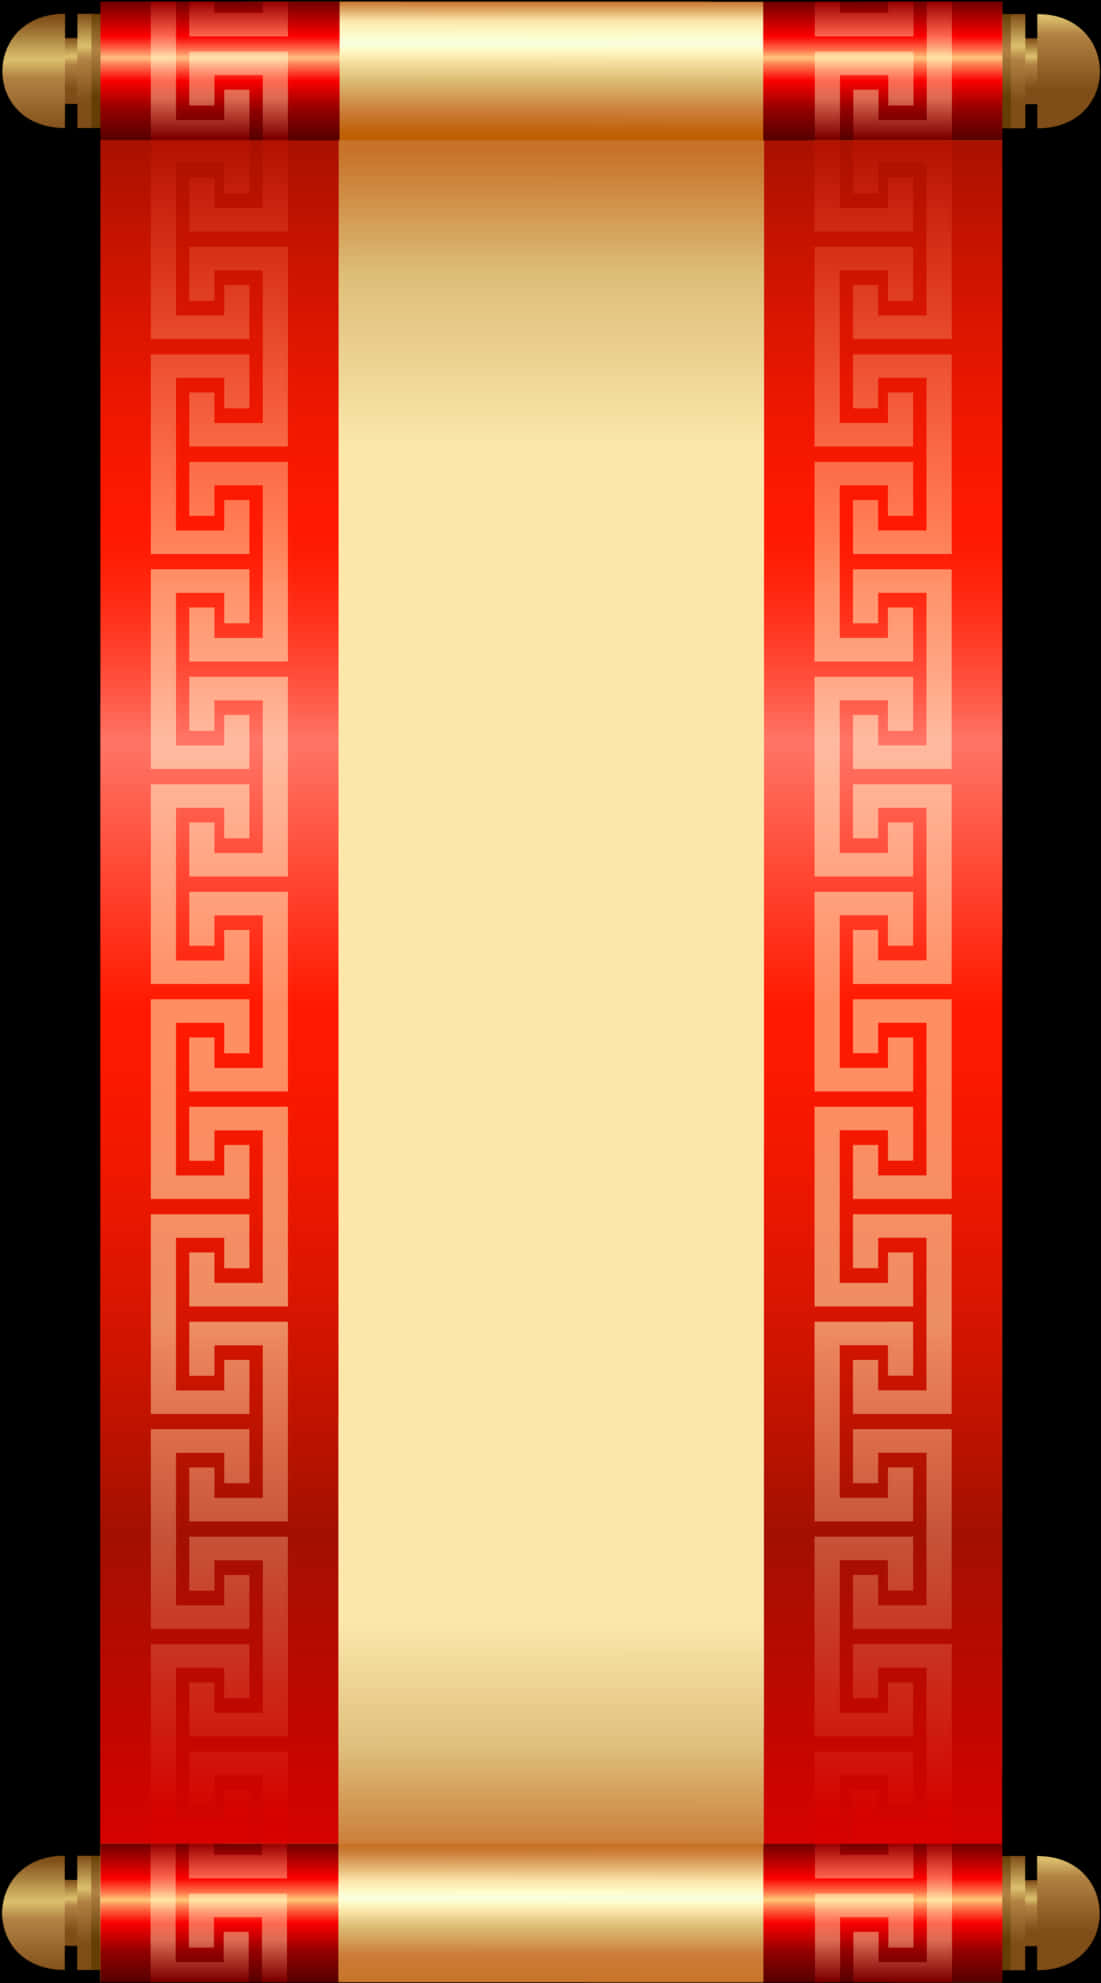 A Red And Yellow Rectangular Object With A Pattern